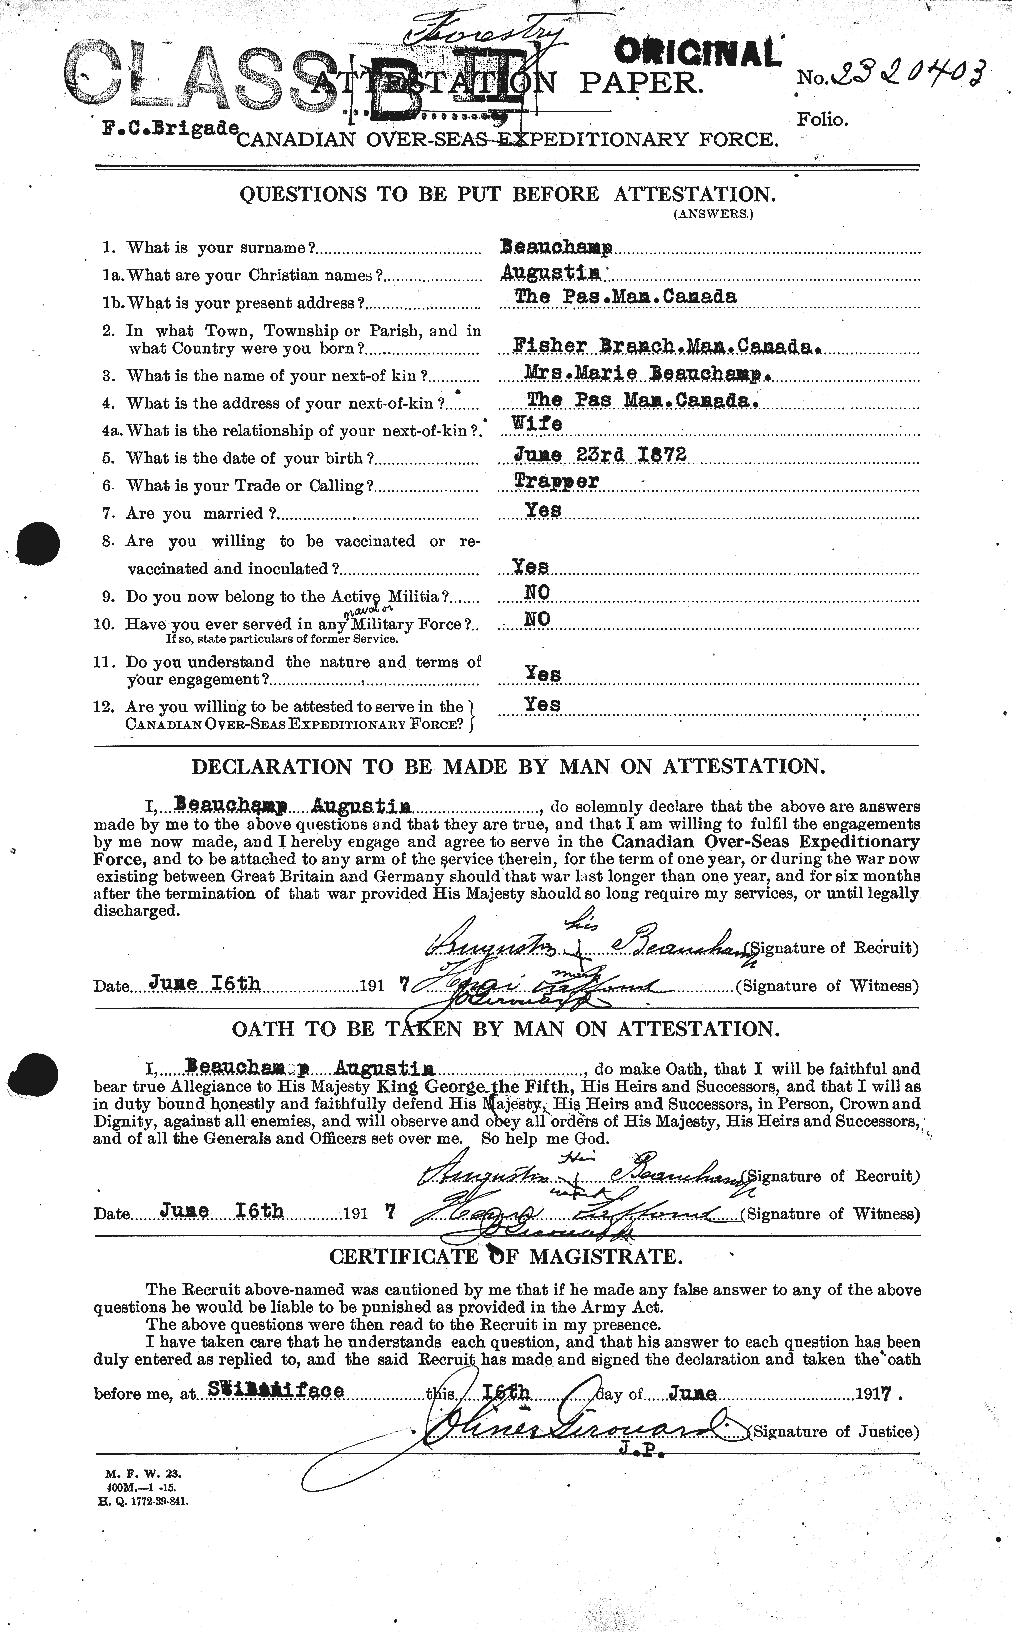 Personnel Records of the First World War - CEF 230945a